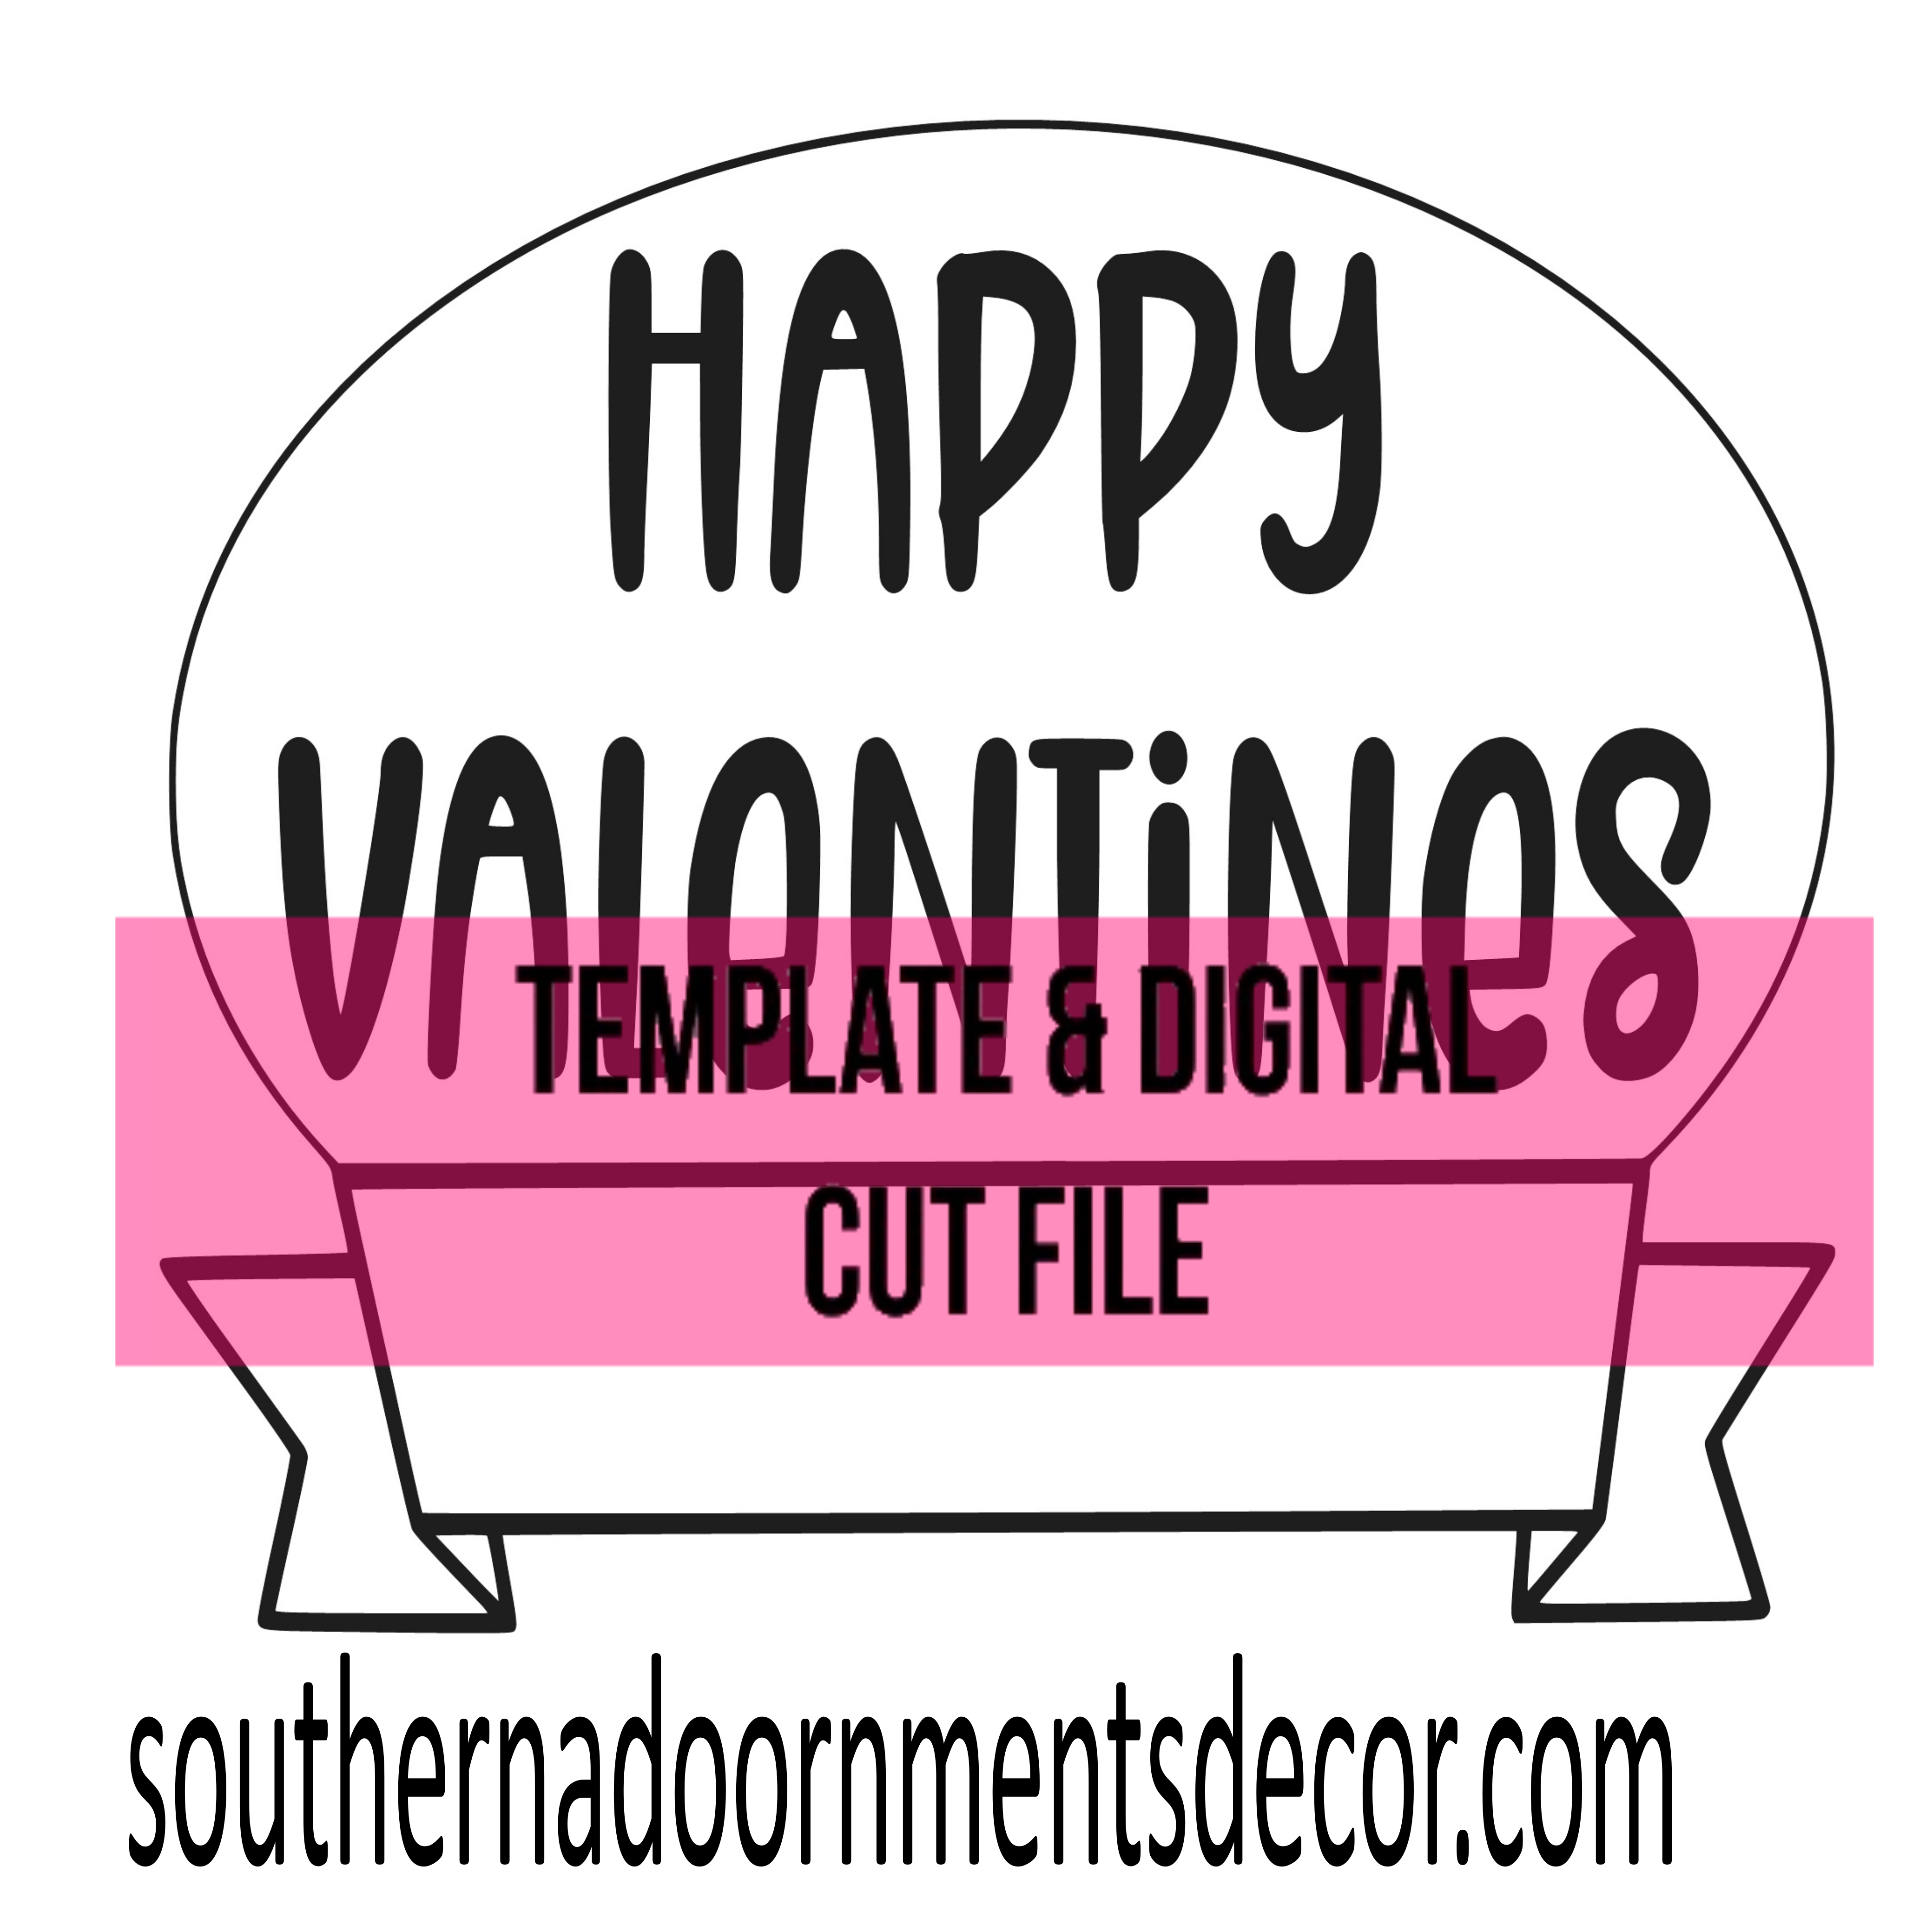 Happy Valentines Sign Template & Digital Cut File